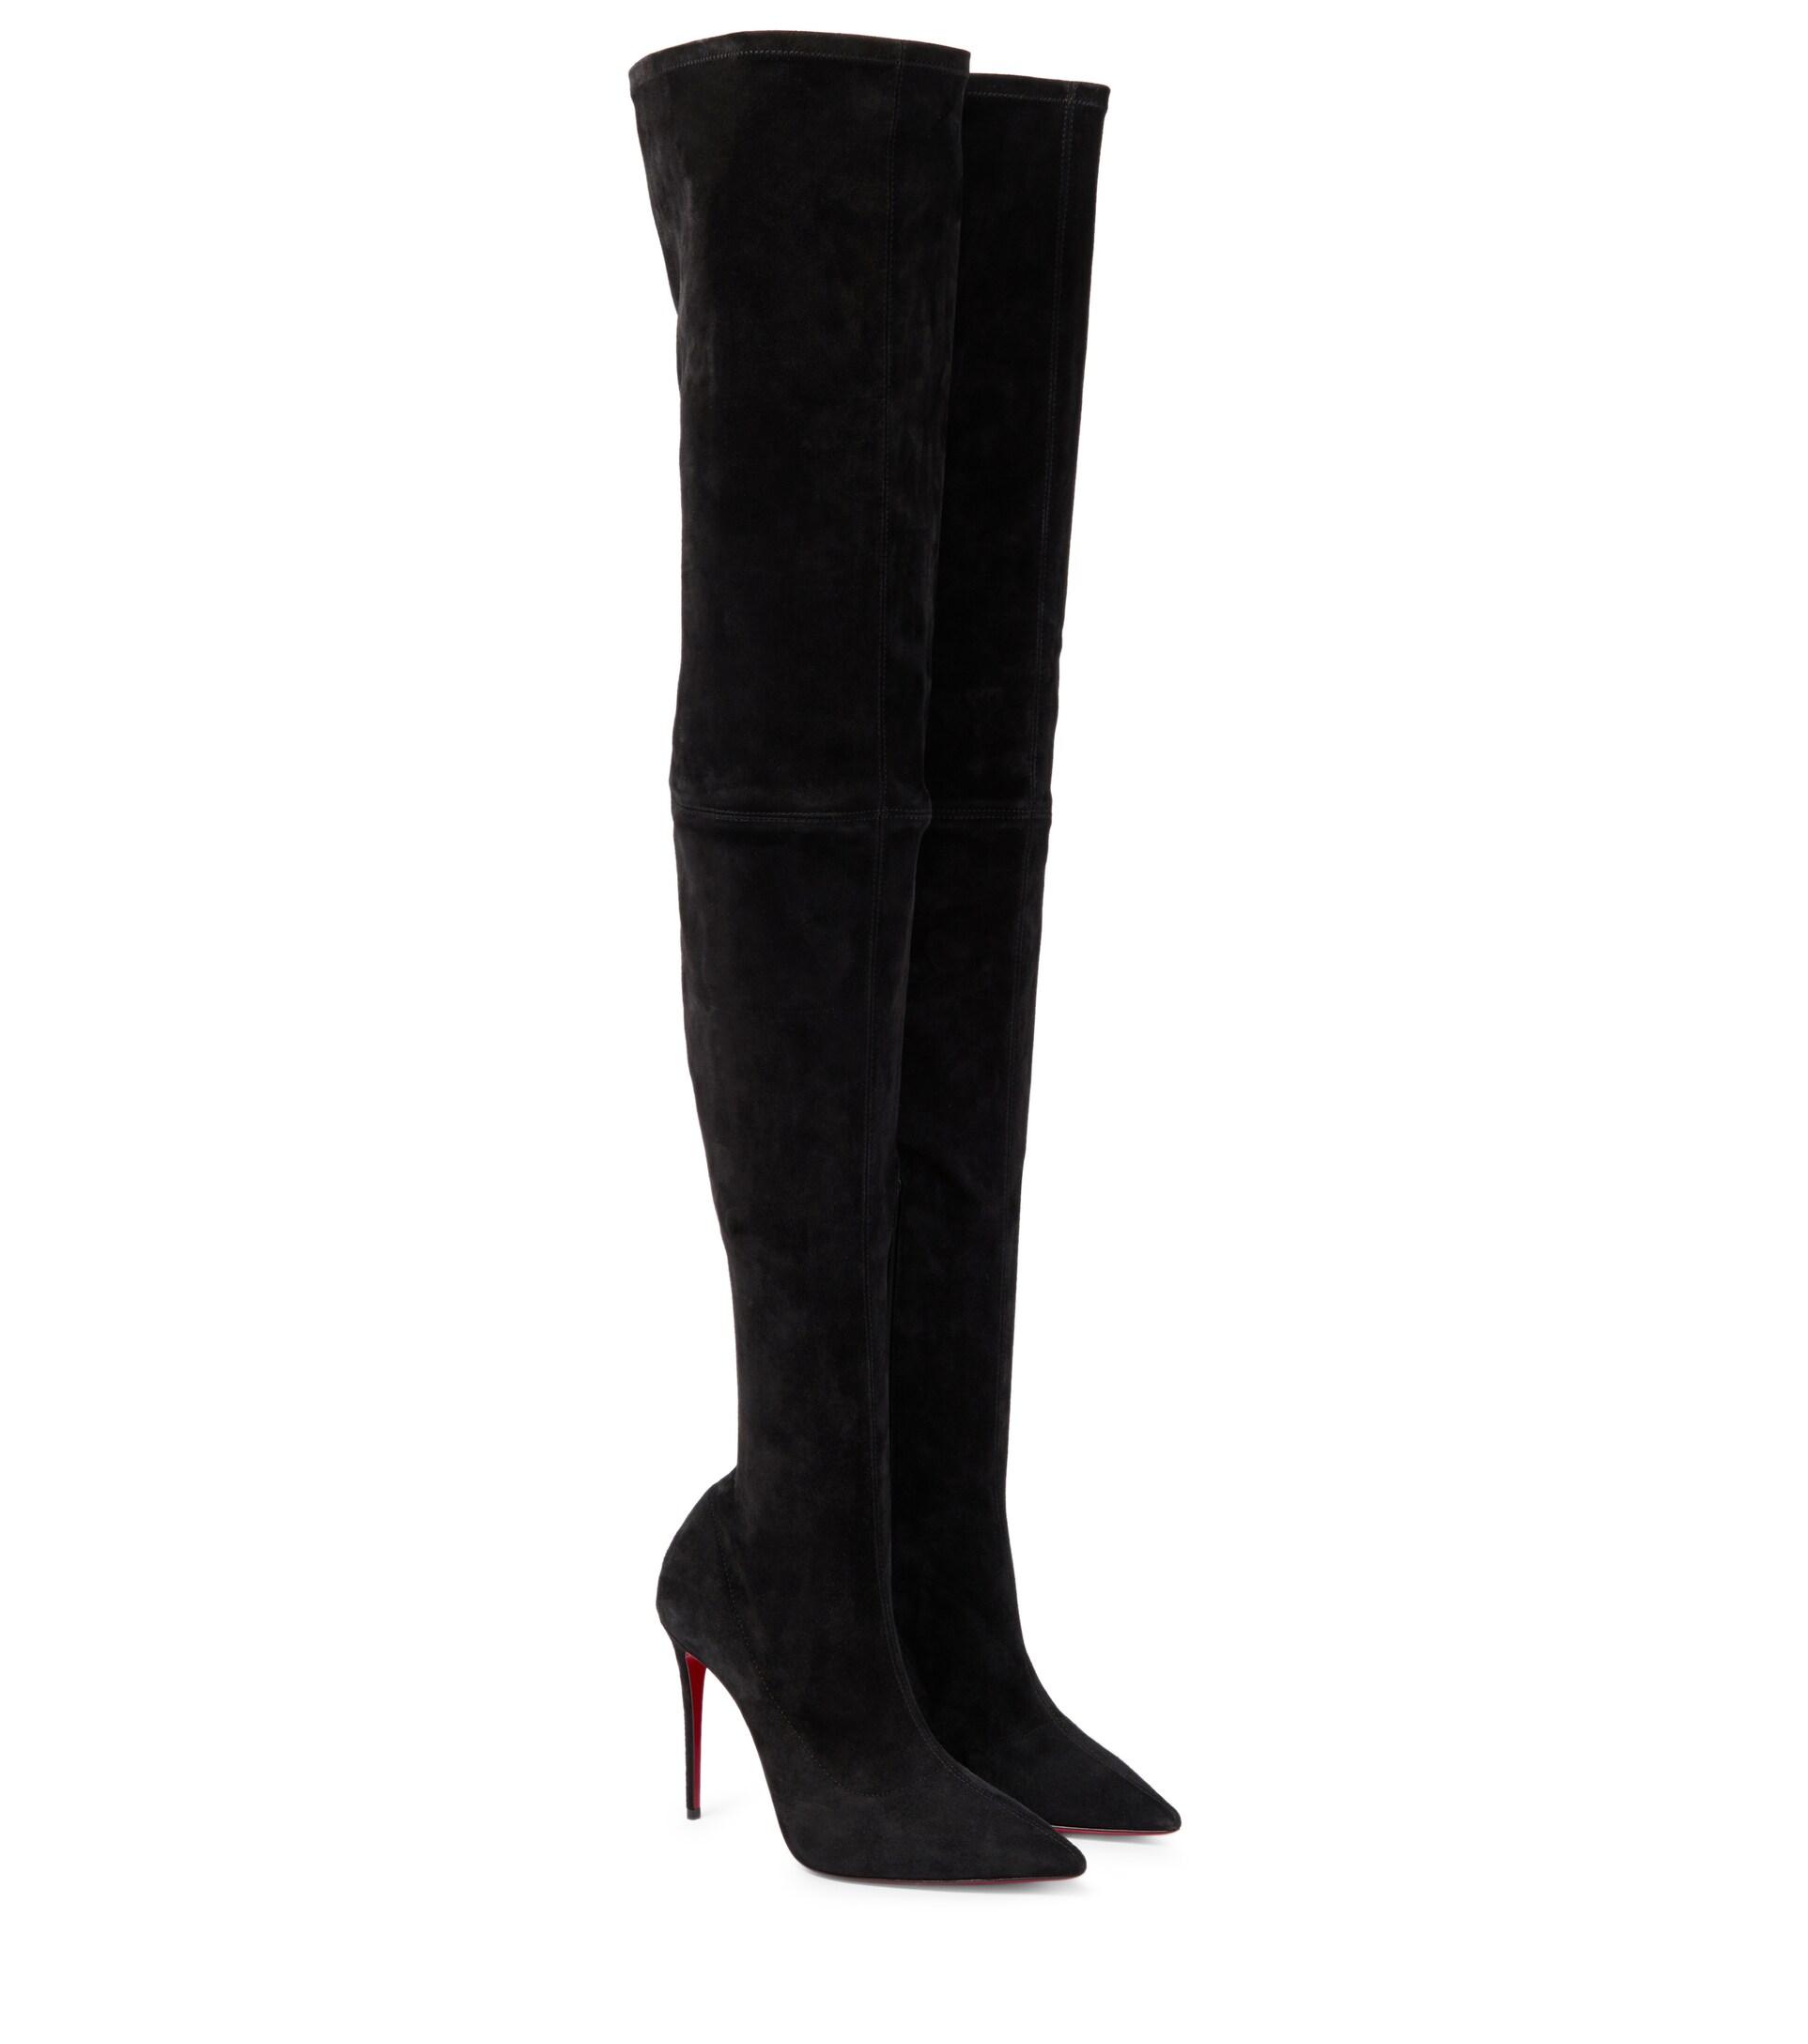 Christian Louboutin Kate Botta 100 Over-the-knee Boots in Black | Lyst